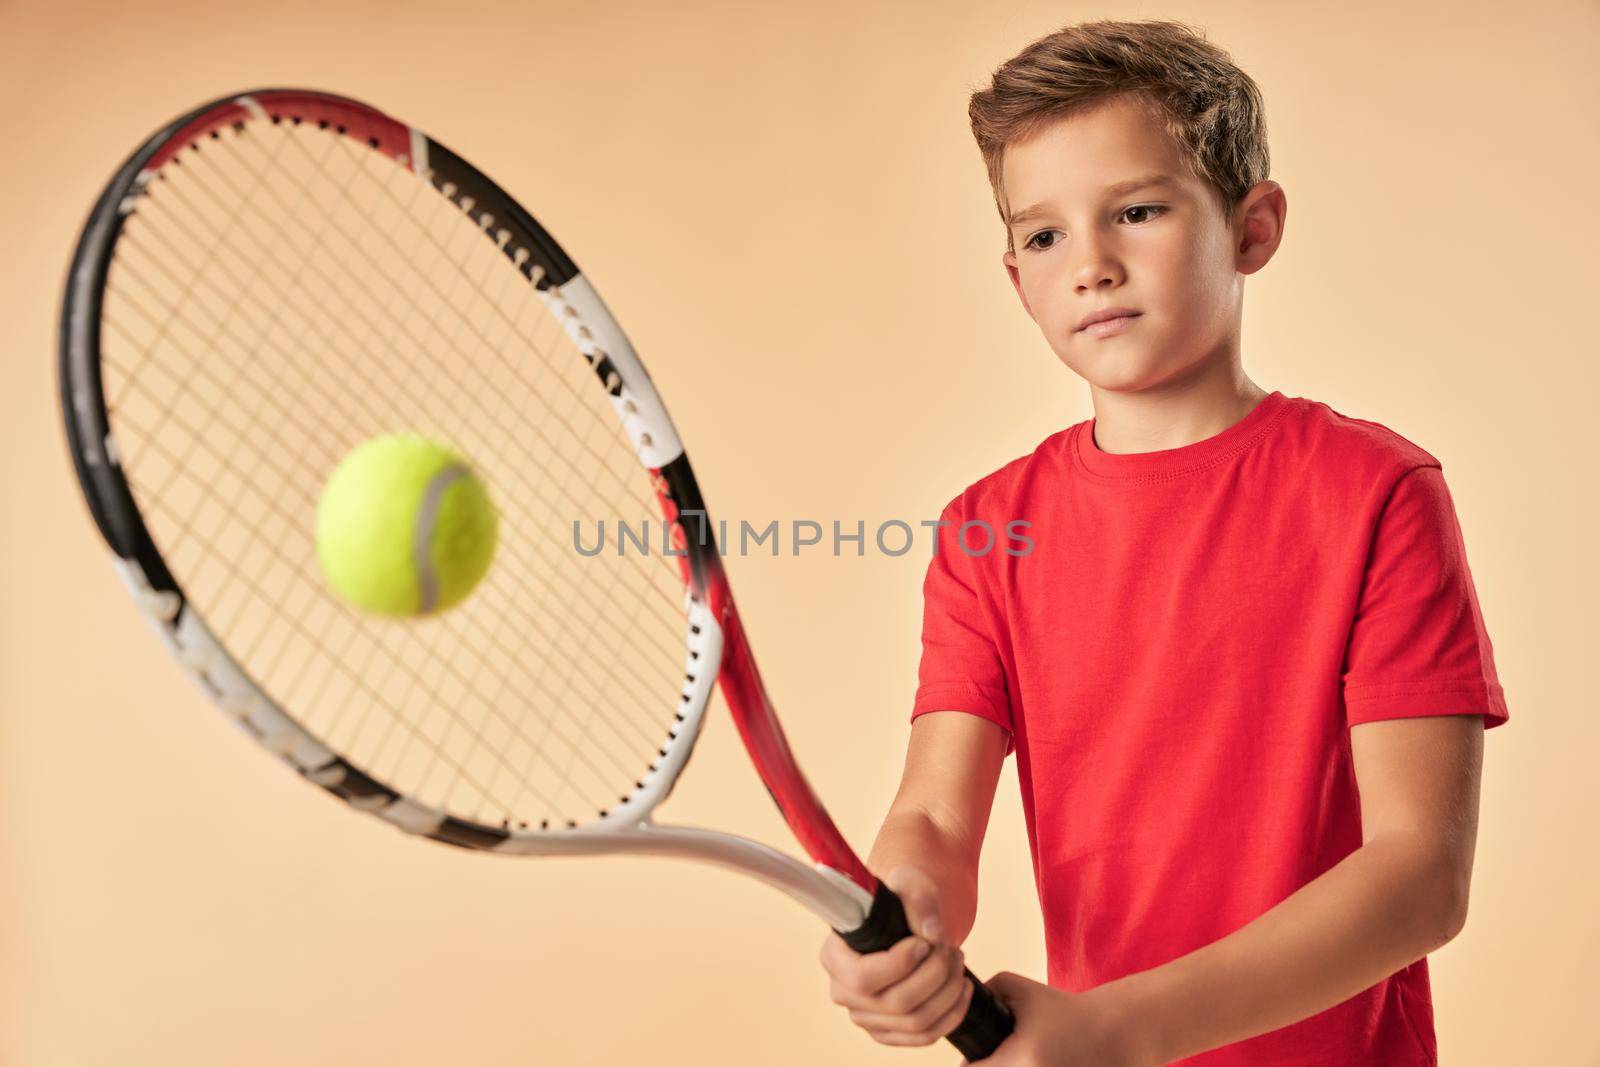 Cute male child tennis player hitting the ball with racket while standing against light orange background